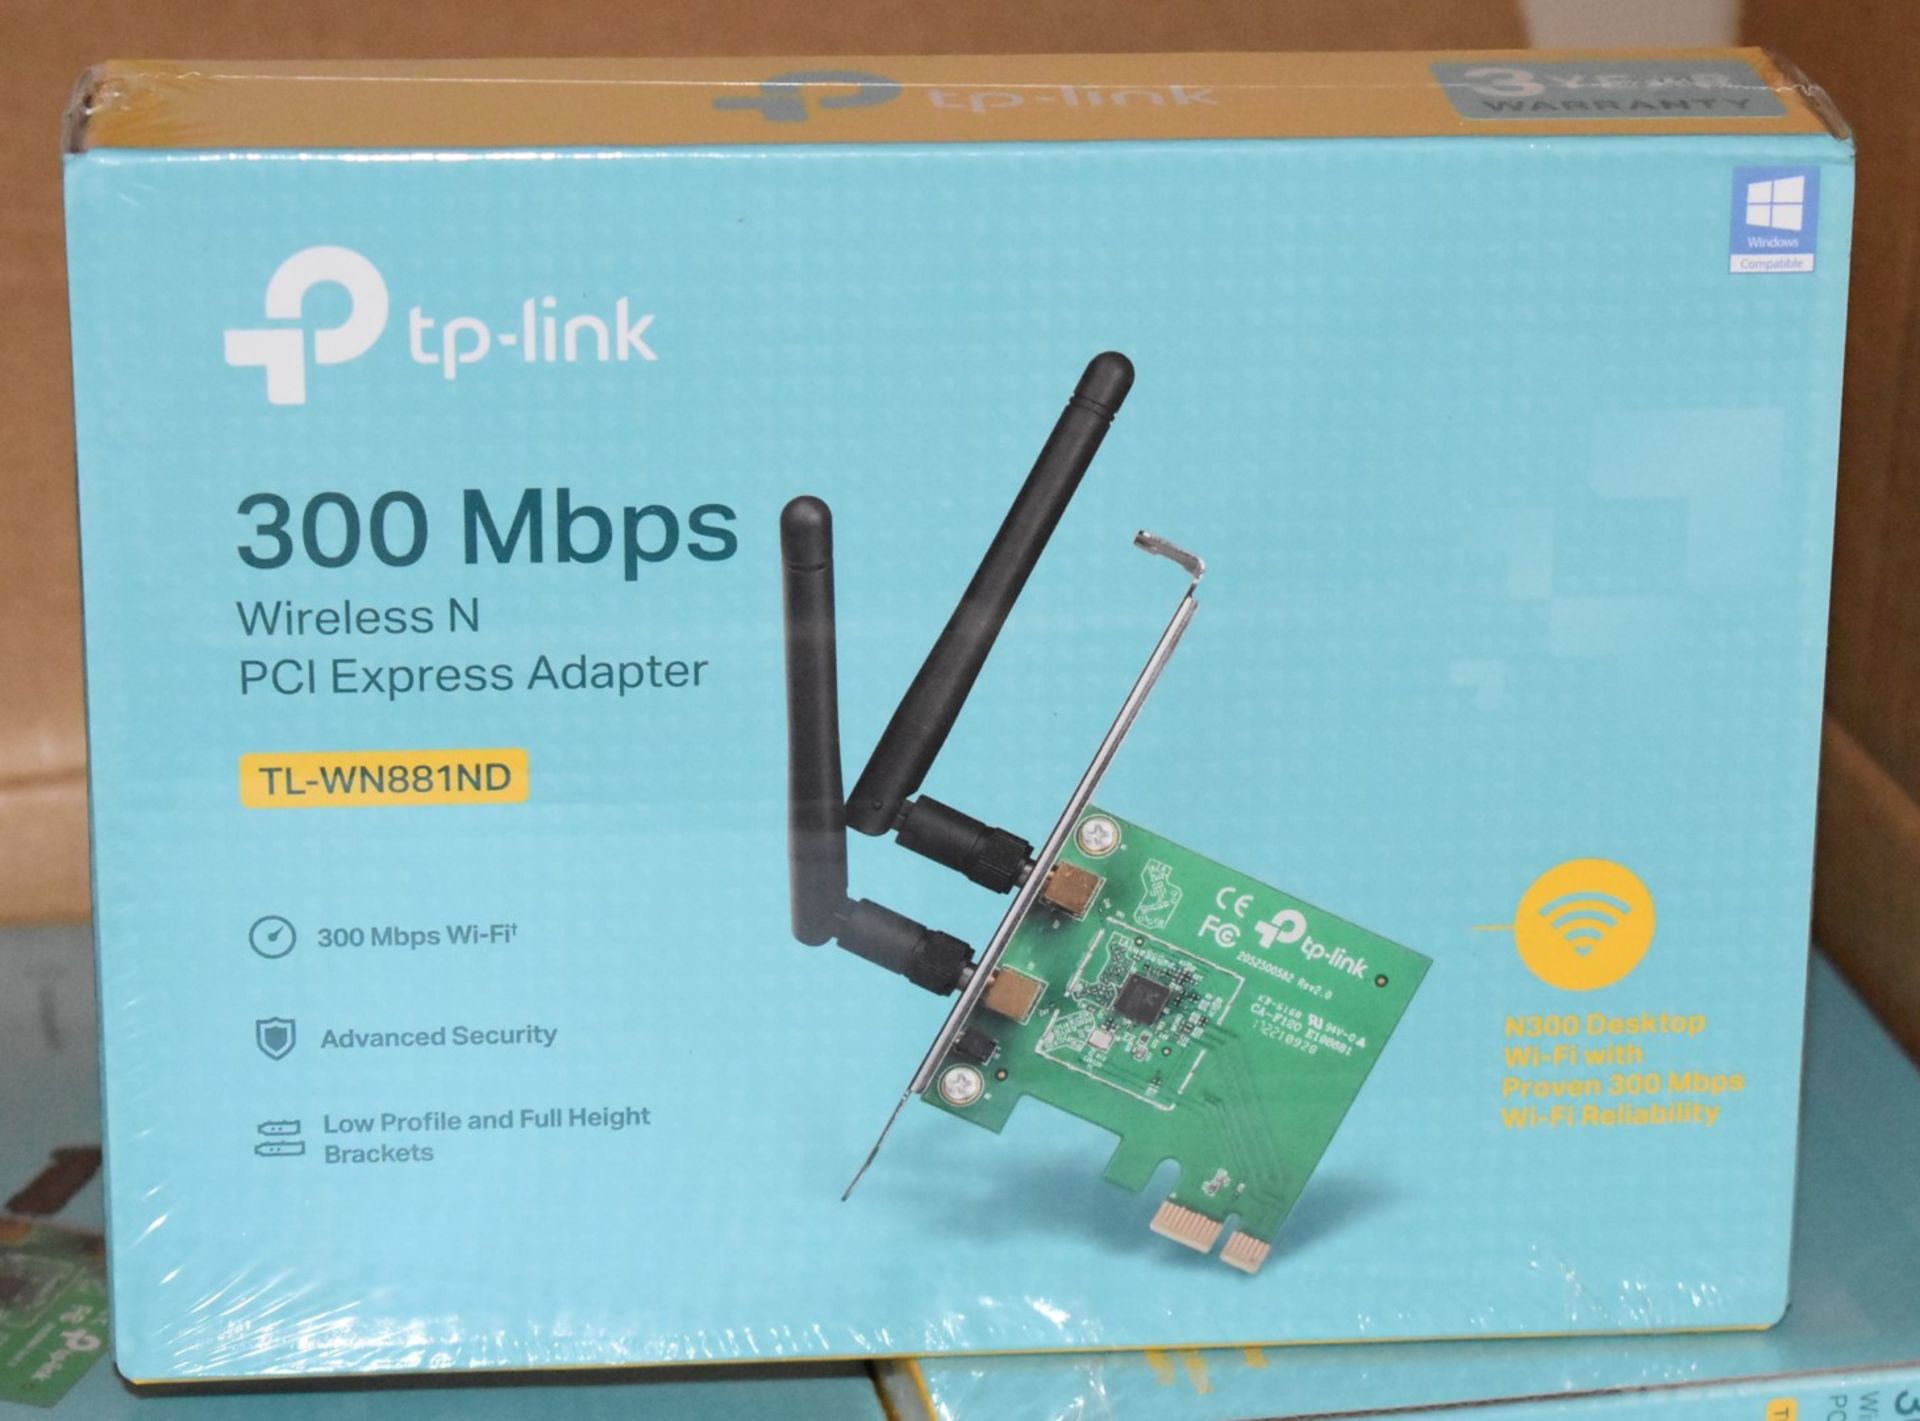 10 x TP-Link TL-WN881ND 300mbps Wireless N Pci Express Adapters - New Boxed Stock - RRP £180 - Image 2 of 2